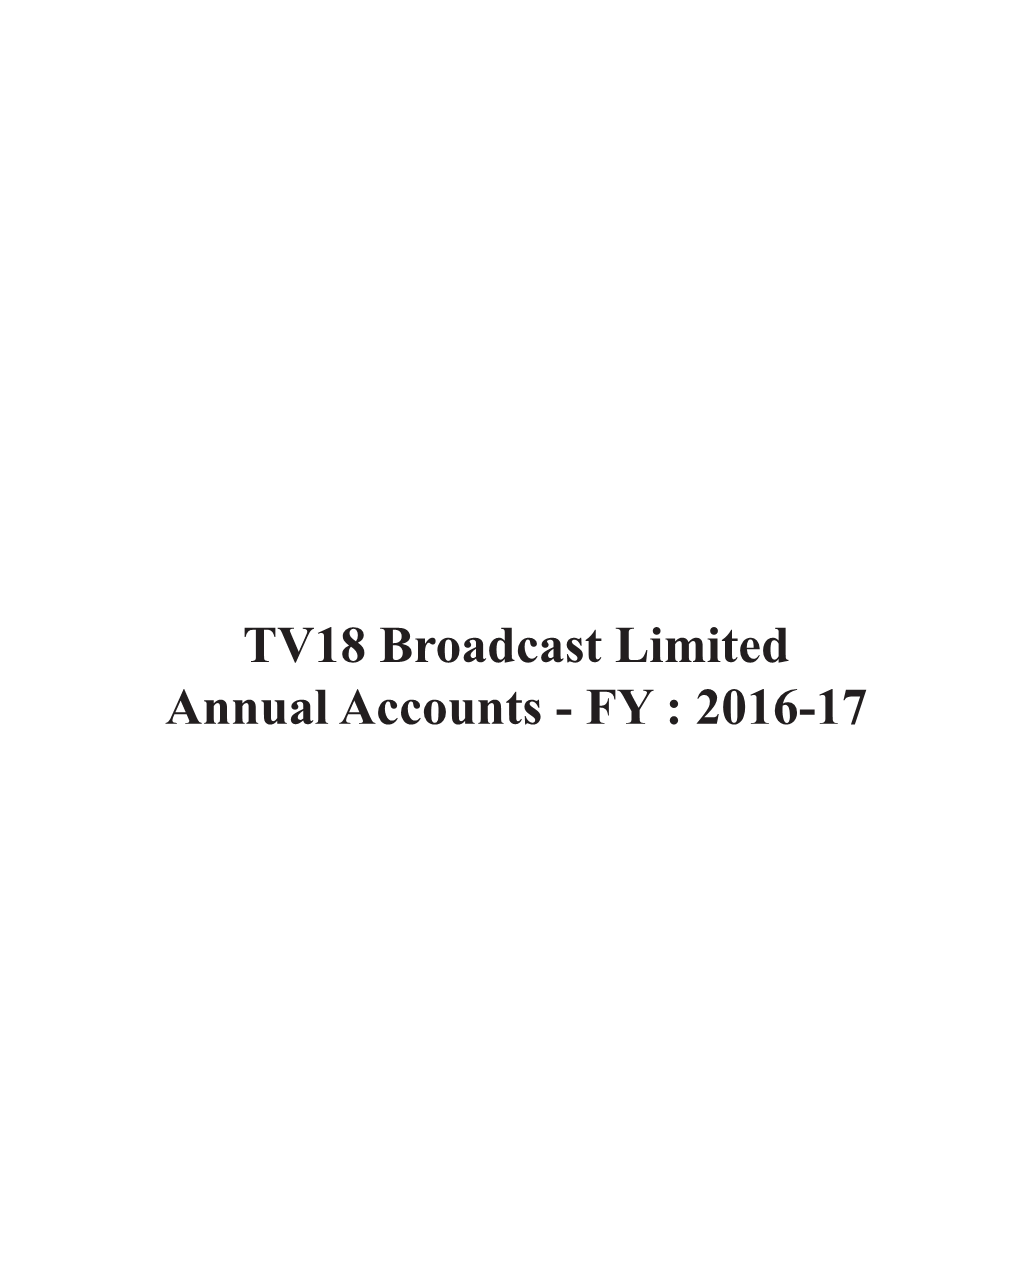 TV18 Broadcast Limited Annual Accounts - FY : 2016-17 2 TV18 Broadcast Limited